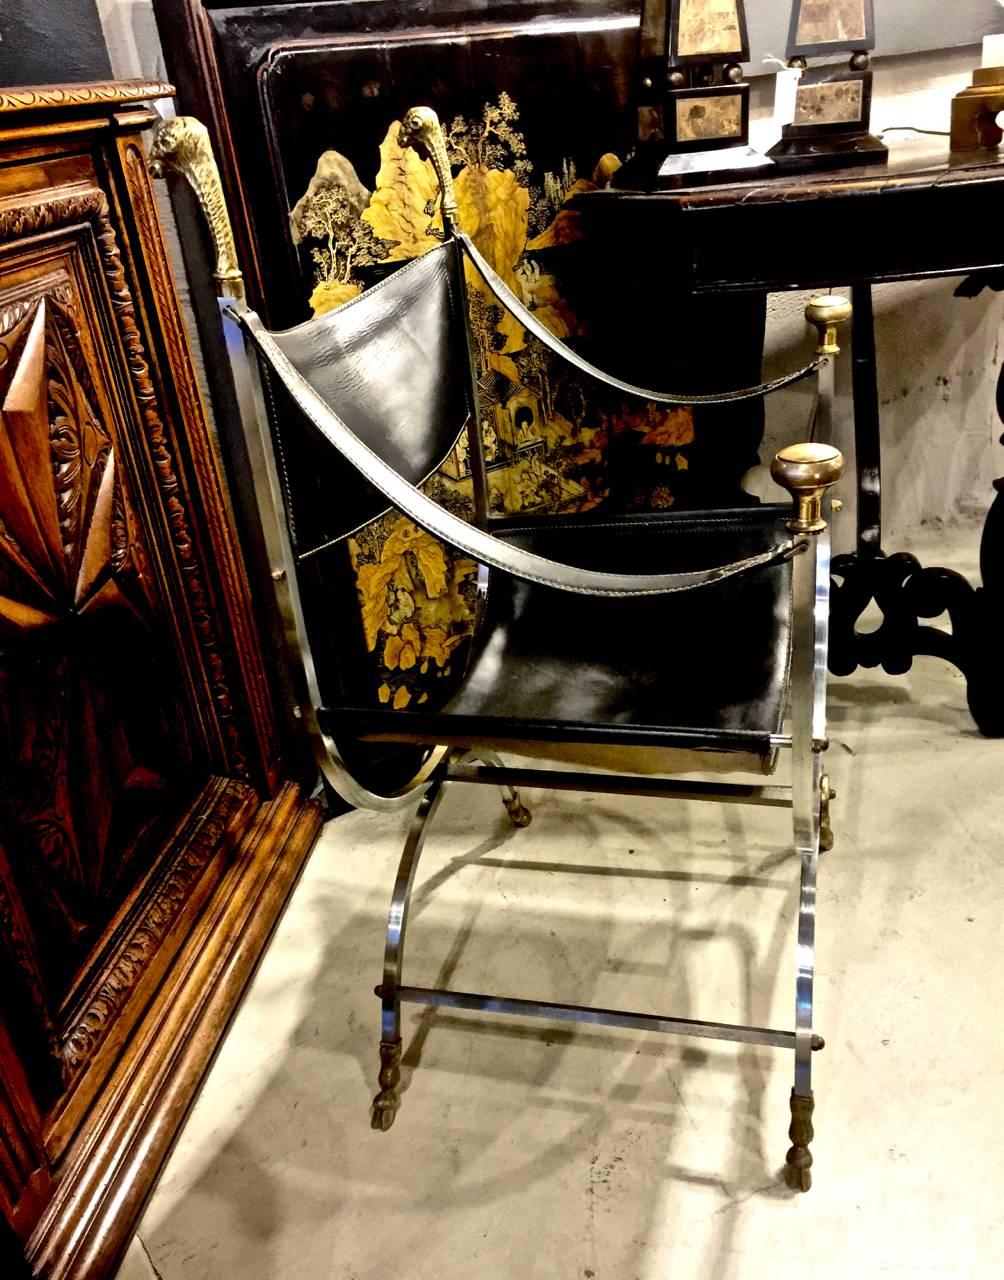 This is an example of the iconic Jansen Curule or Savonarola chair. The chair is beautifully detailed in steel, cast brass and leather. The Jansen Savonarola chair is distinguished by it's intricately cast brass ram's head finial and paw feet.
This